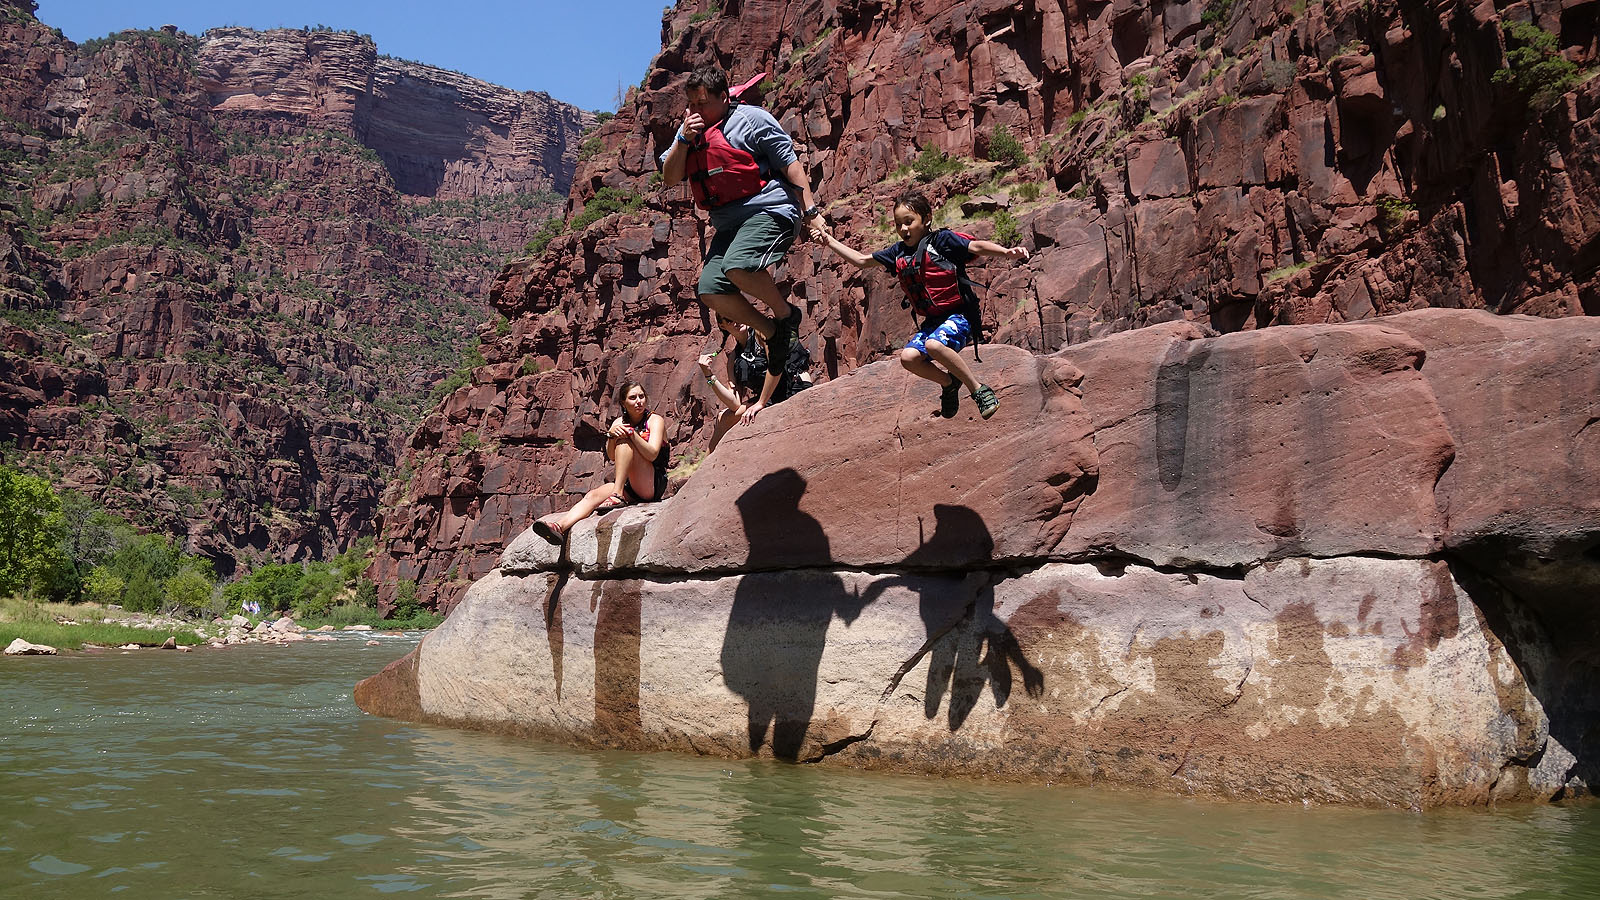 Jumping off of a rock into the Green River in Dinosaur National Monument